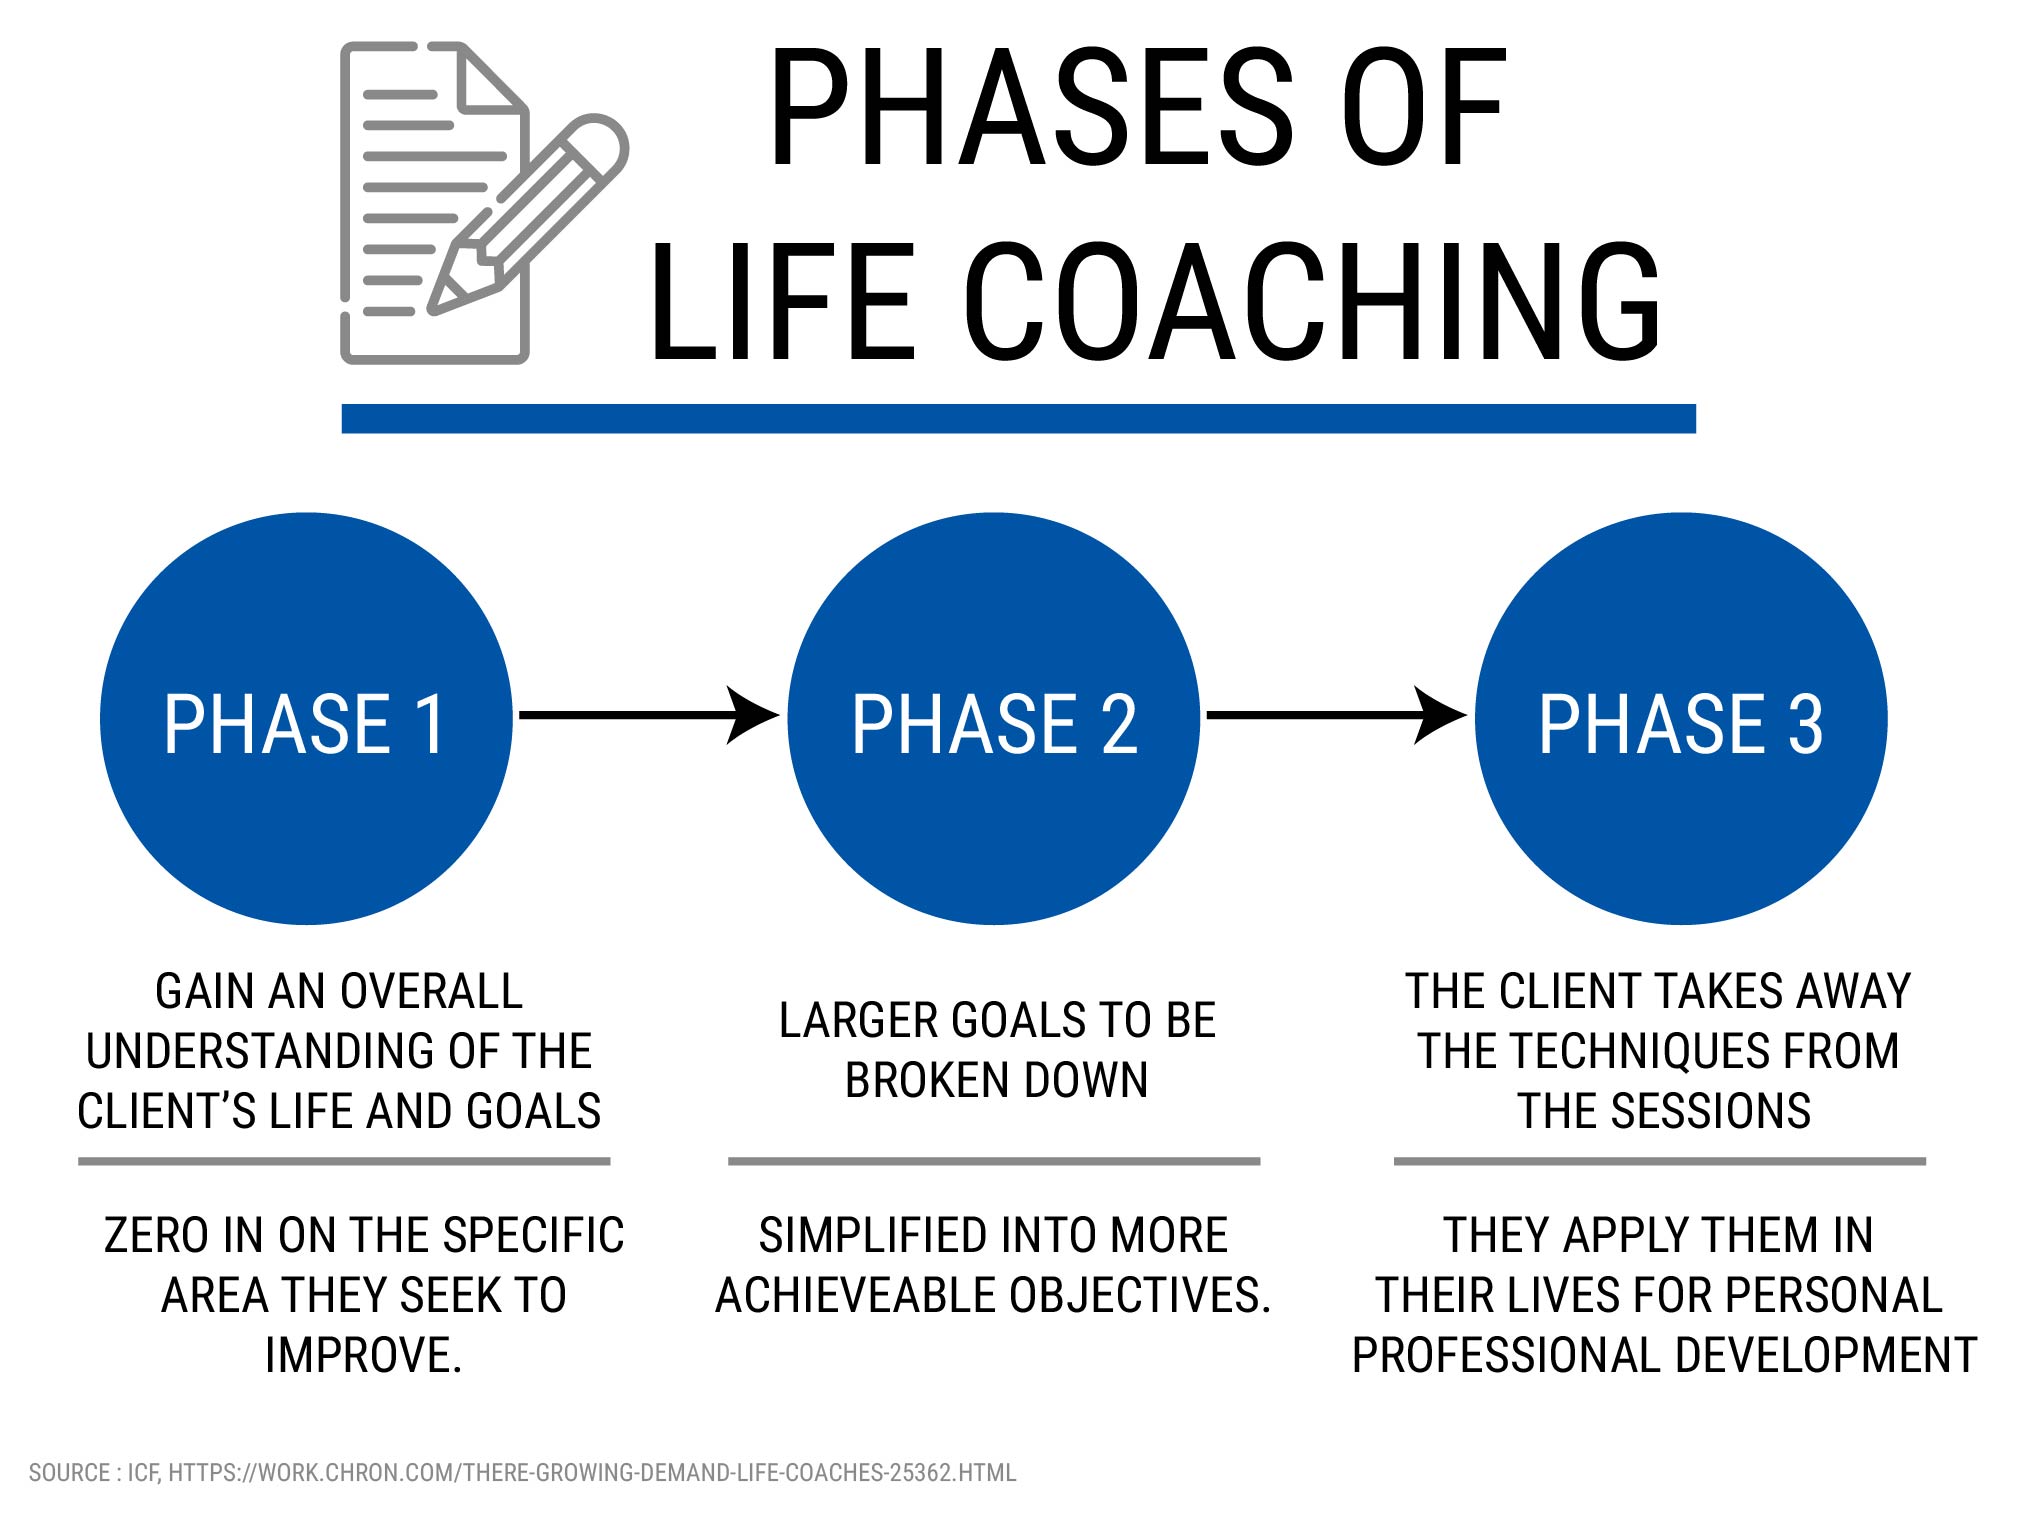 PHASES OF LIFE COACHING